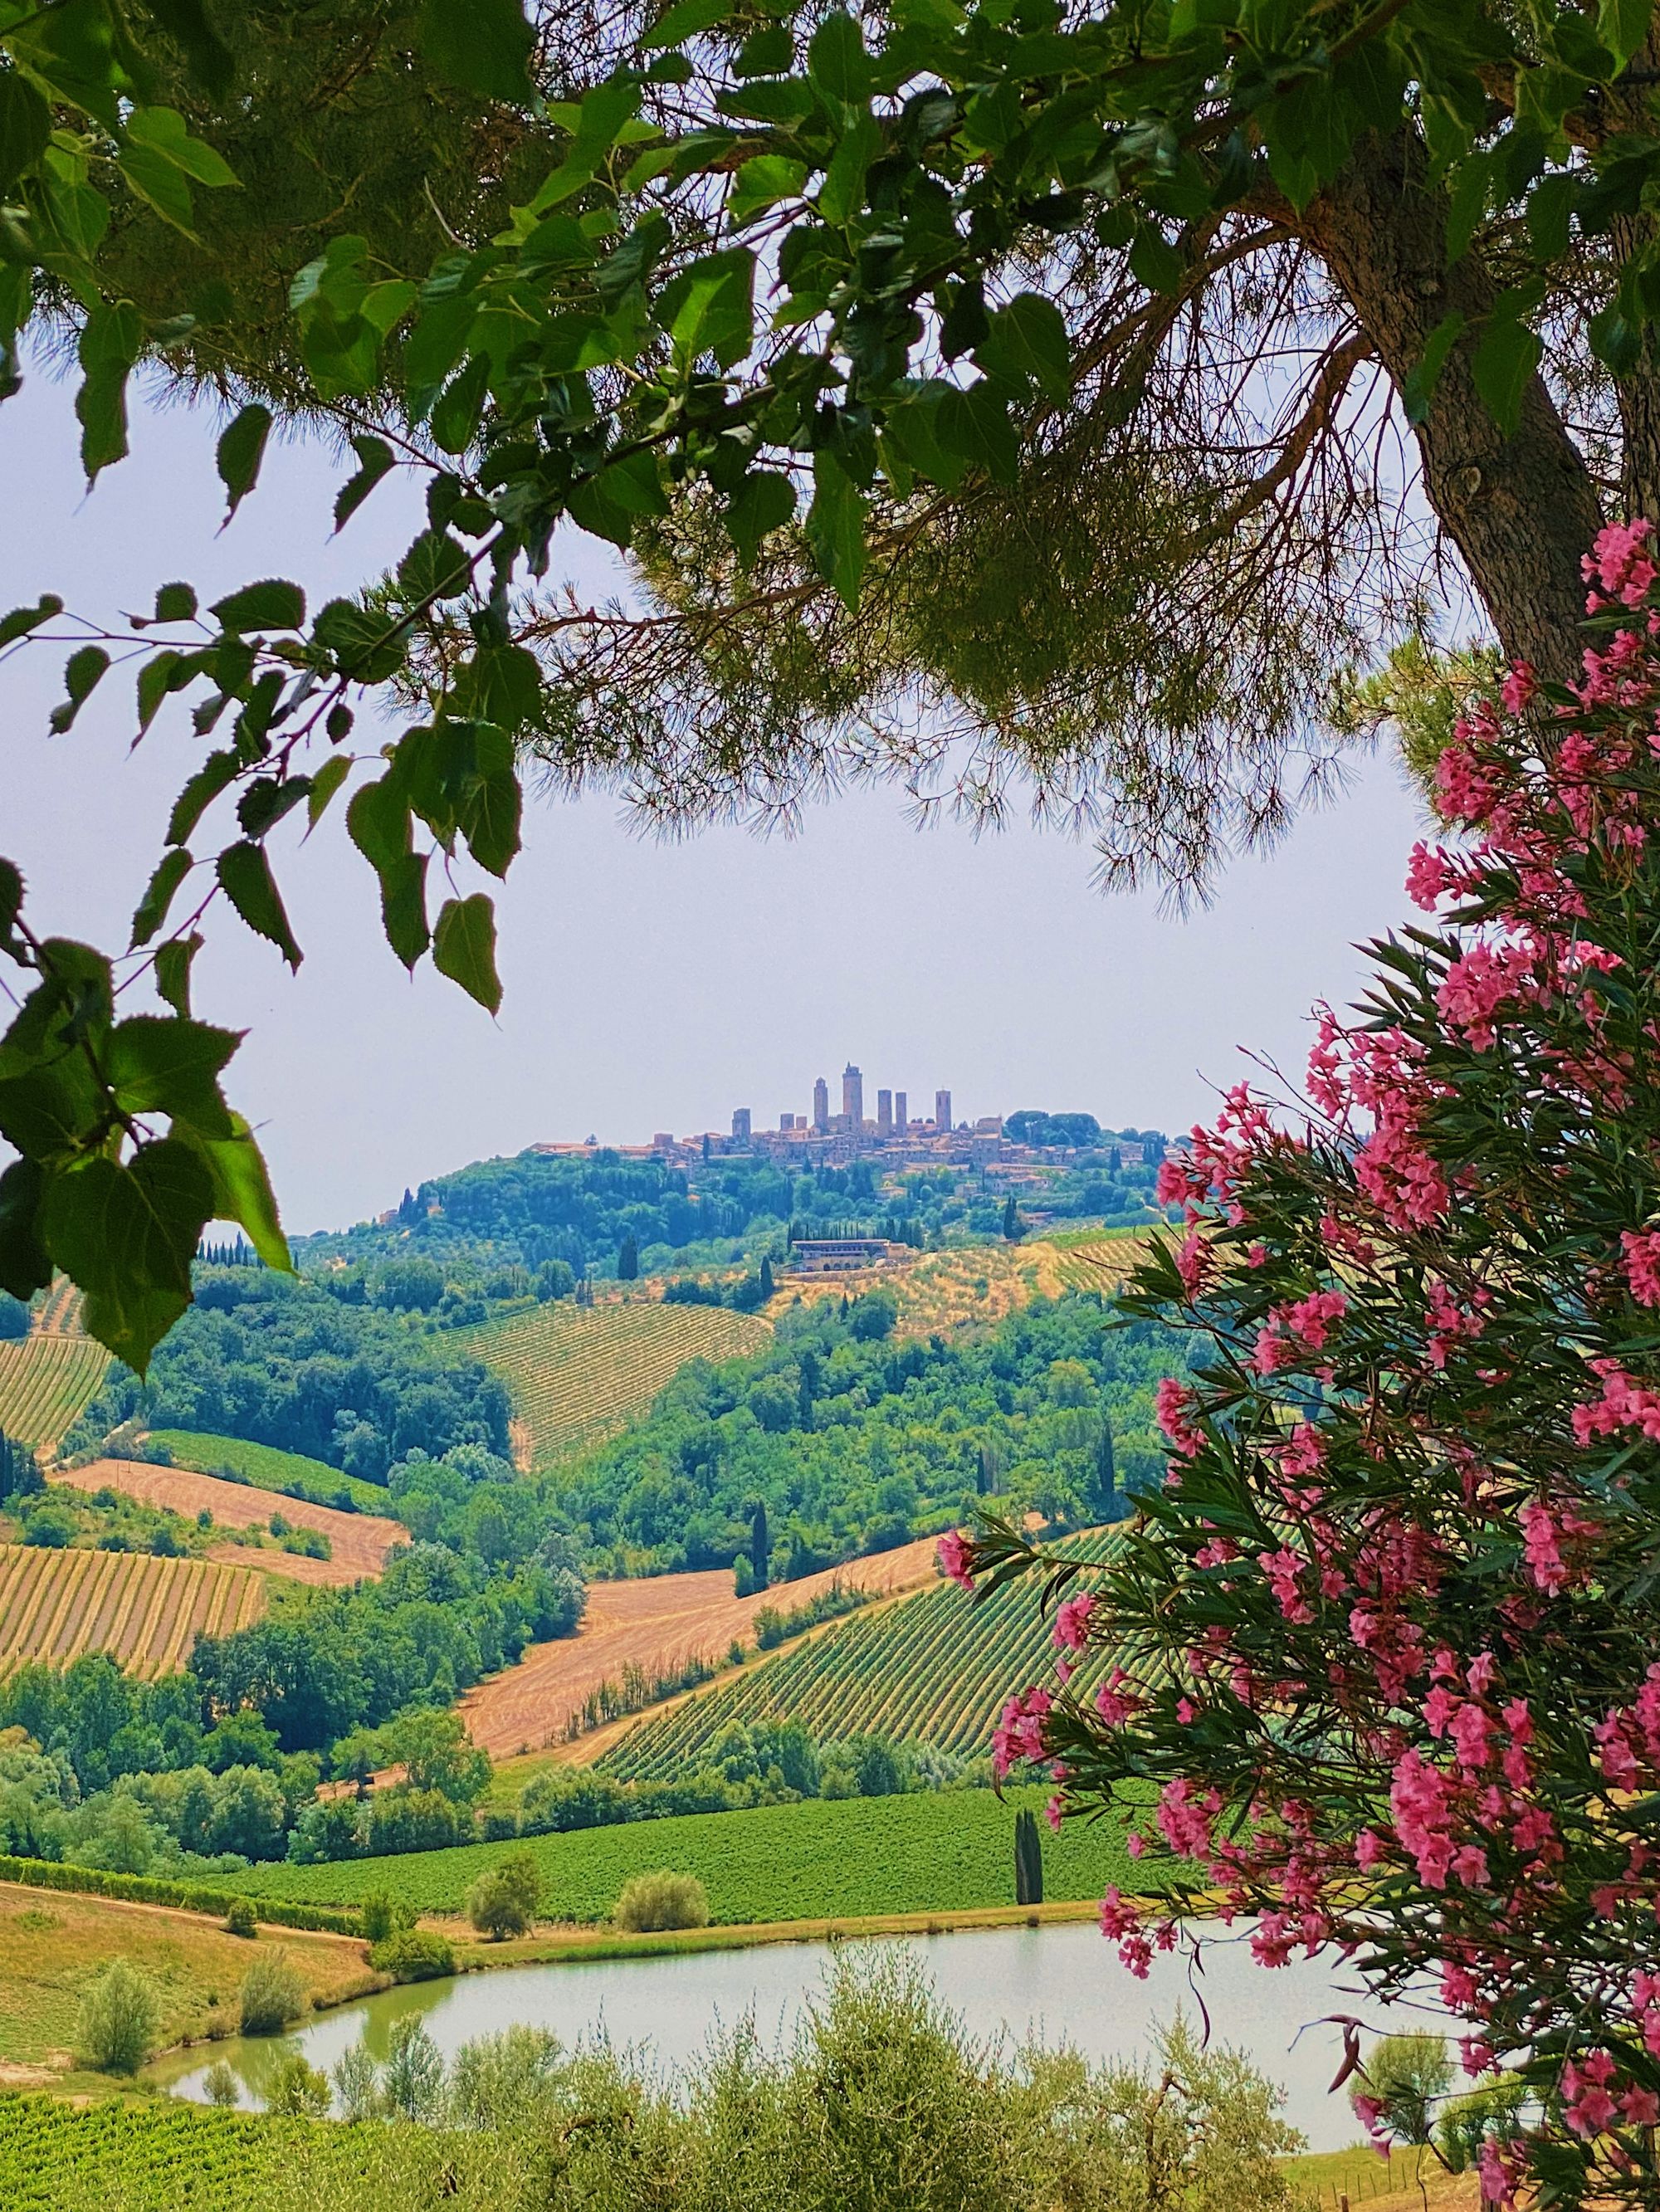 Tuscan landscape with San Gimignano seen in the background, summer vacation 2021